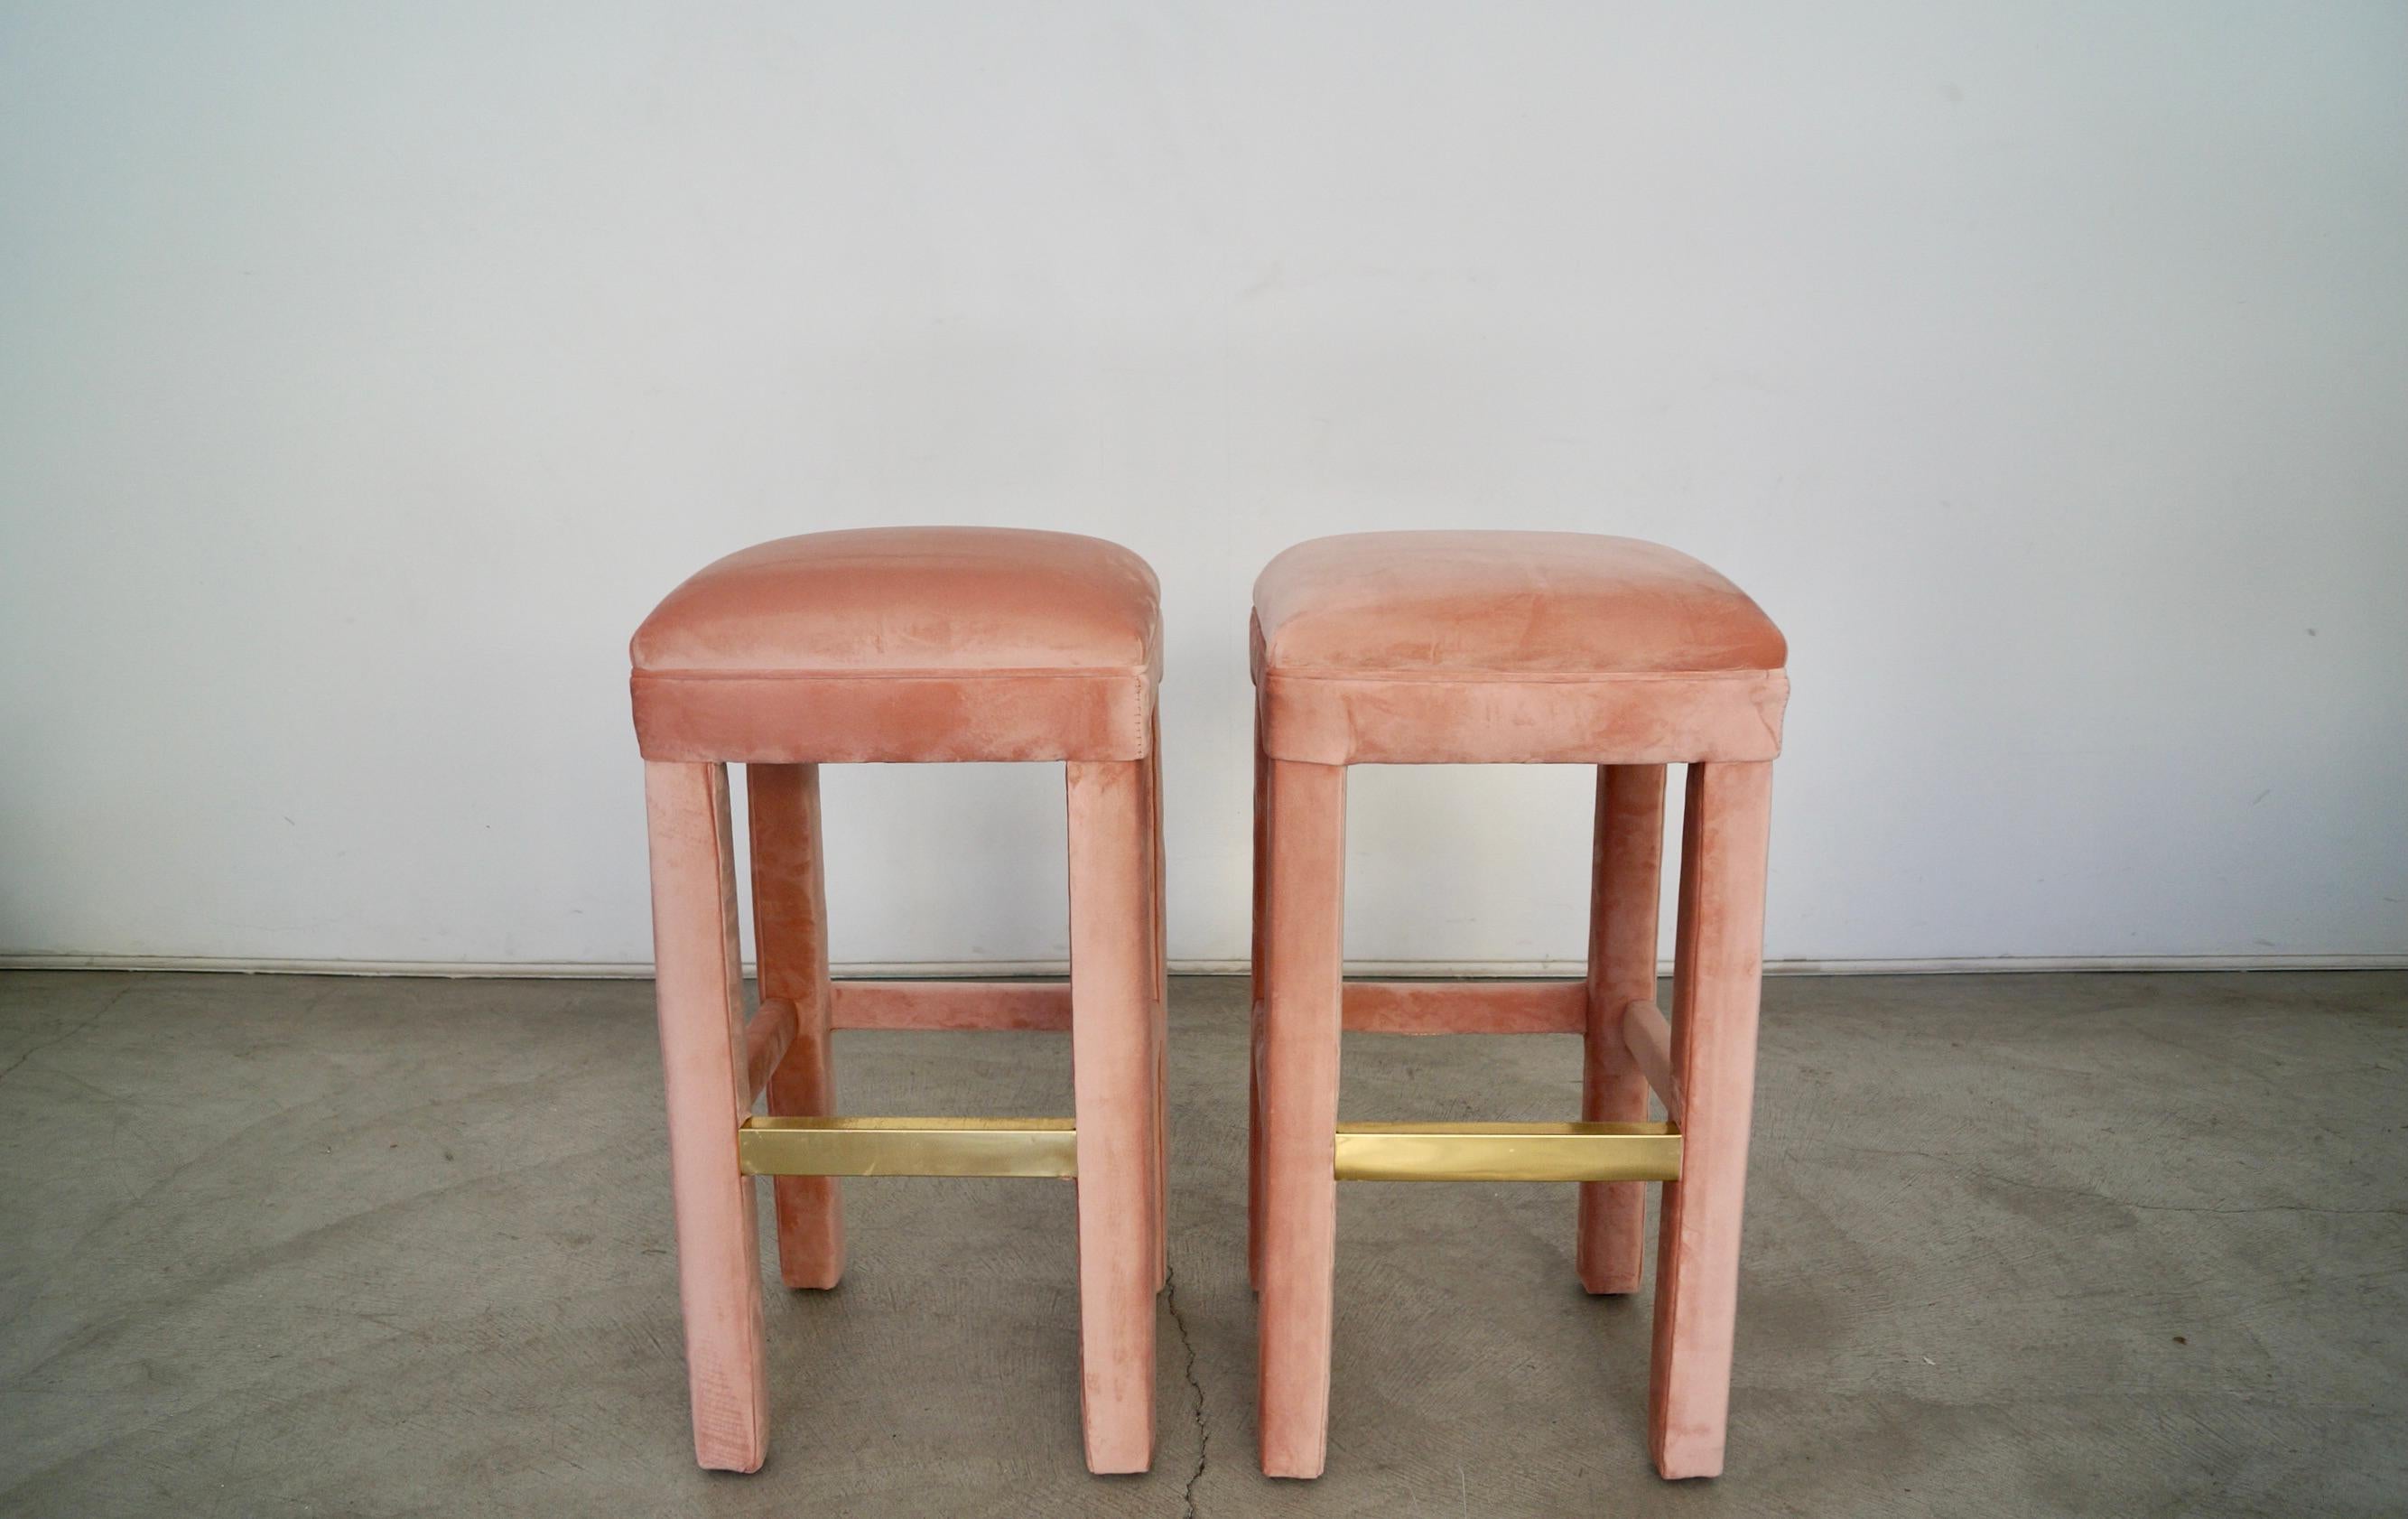 Vintage 1970's Hollywood Regency parsons bar stools for sale. These were reupholstered in pink velvet, and are fully upholstered. The hey have brass footrest. They are really solid and well made, and have springs on the seats. These are original